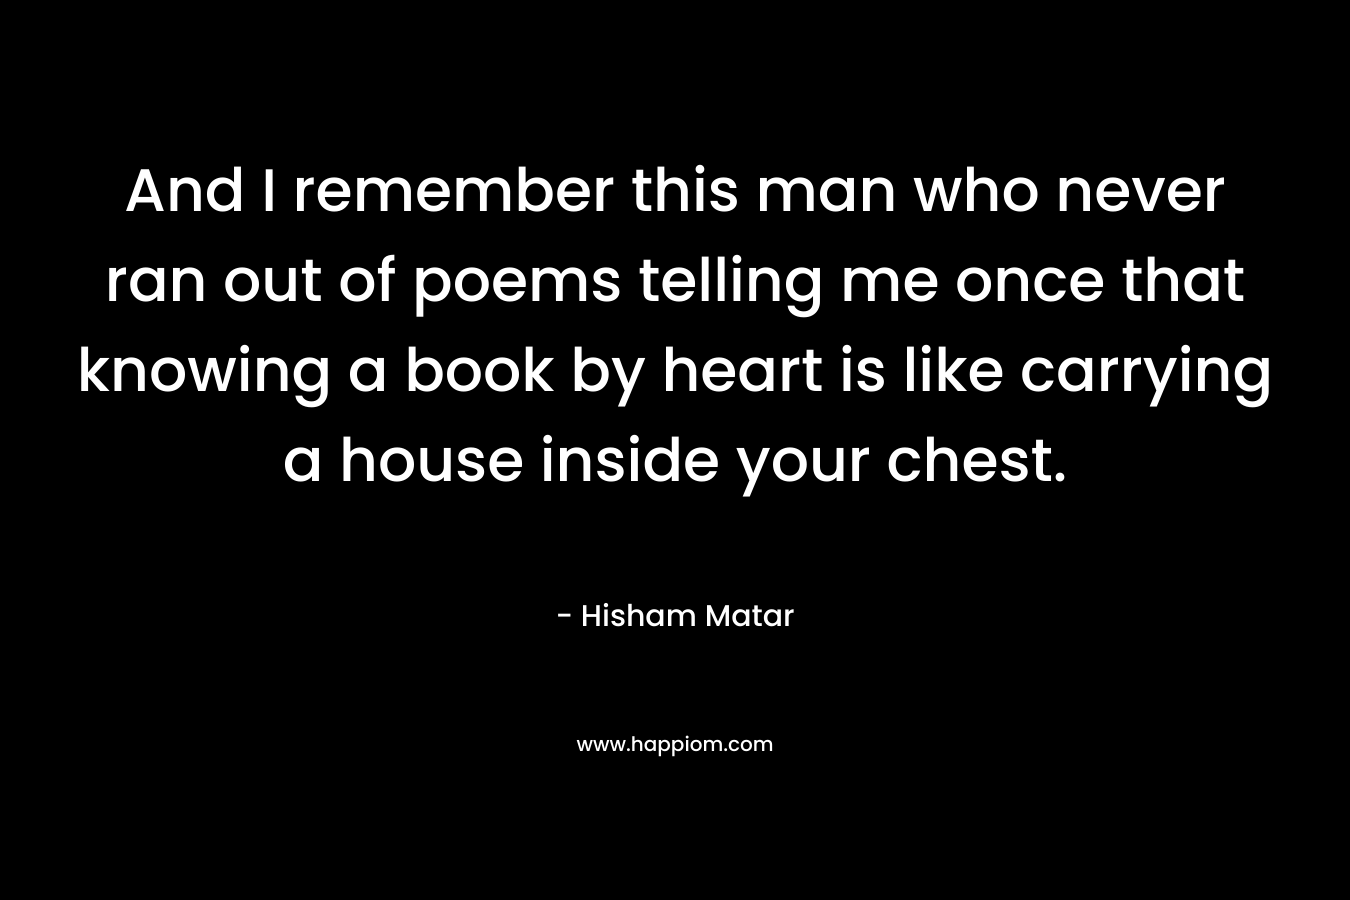 And I remember this man who never ran out of poems telling me once that knowing a book by heart is like carrying a house inside your chest.